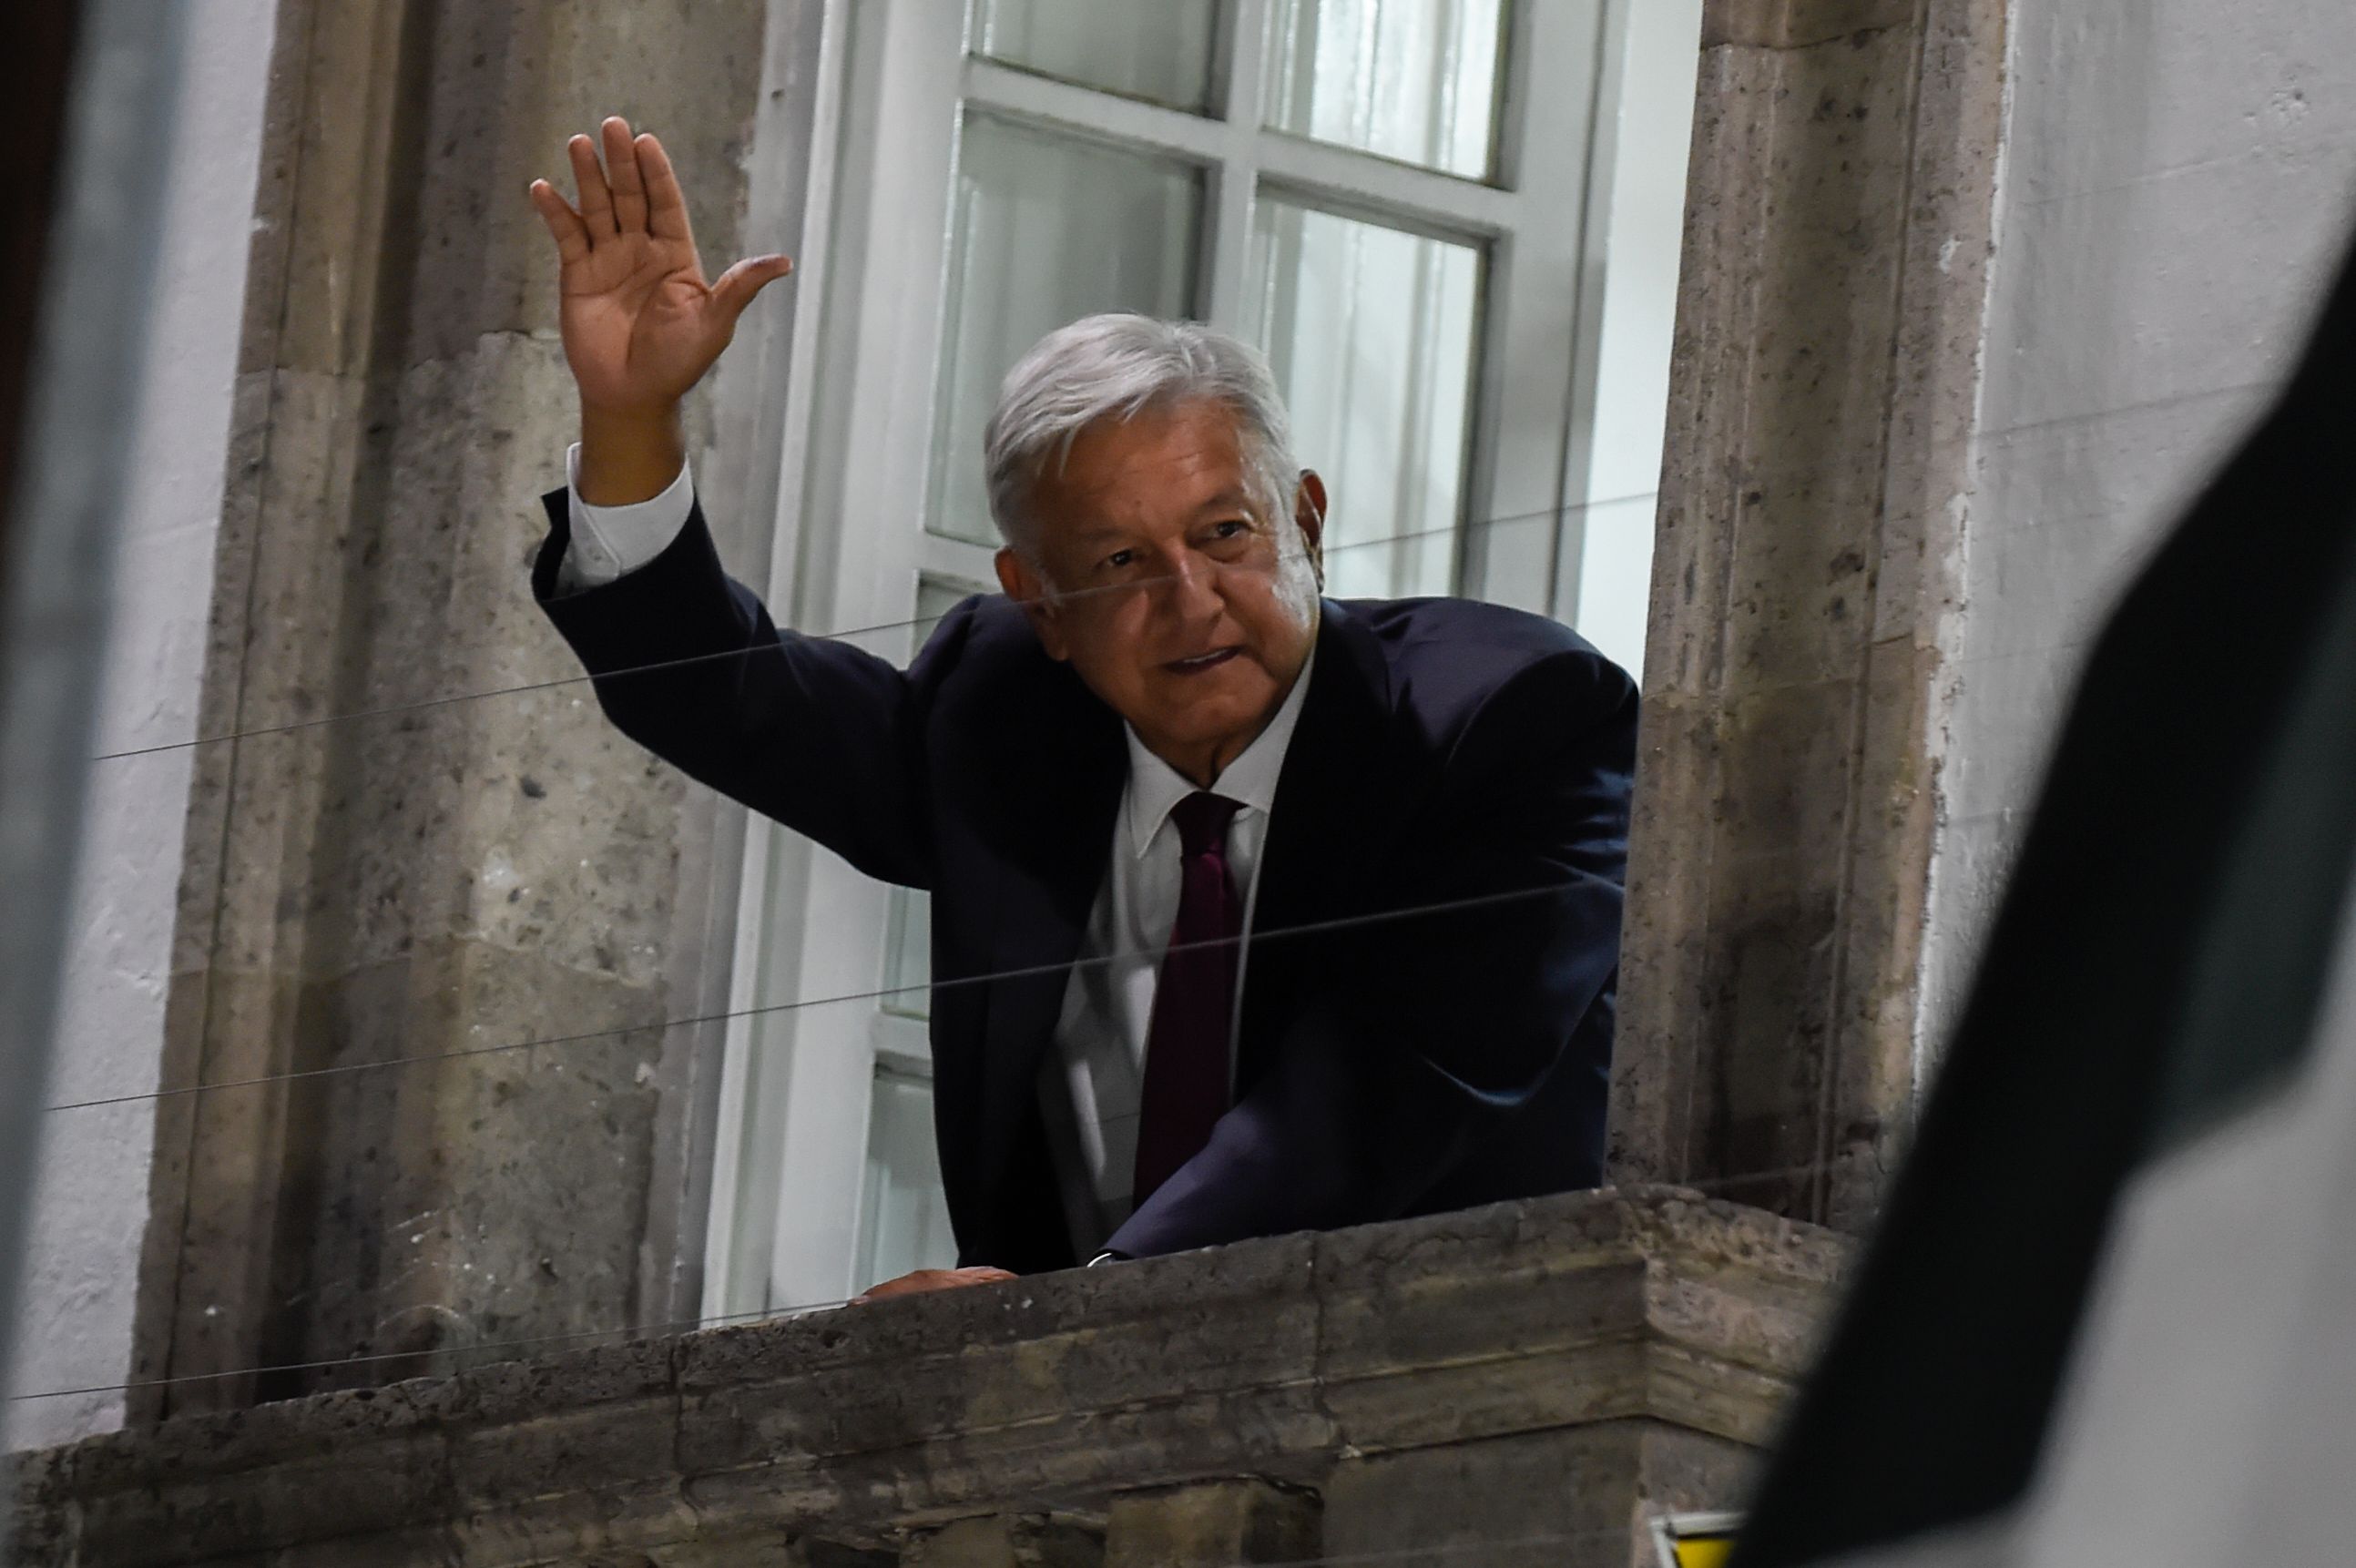 Newly elected Mexico's President Andres Manuel Lopez Obrador, running for "Juntos haremos historia" party, waves to his supporters after winning general elections, in Mexico City, on July 1, 2018. - Anti-establishment leftist Andres Manuel Lopez Obrador won Mexico's presidential election Sunday by a large margin, according to exit polls, in a landmark break with the parties that have governed for nearly a century. (Photo by ALFREDO ESTRELLA / AFP) (Photo credit should read ALFREDO ESTRELLA/AFP/Getty Images)